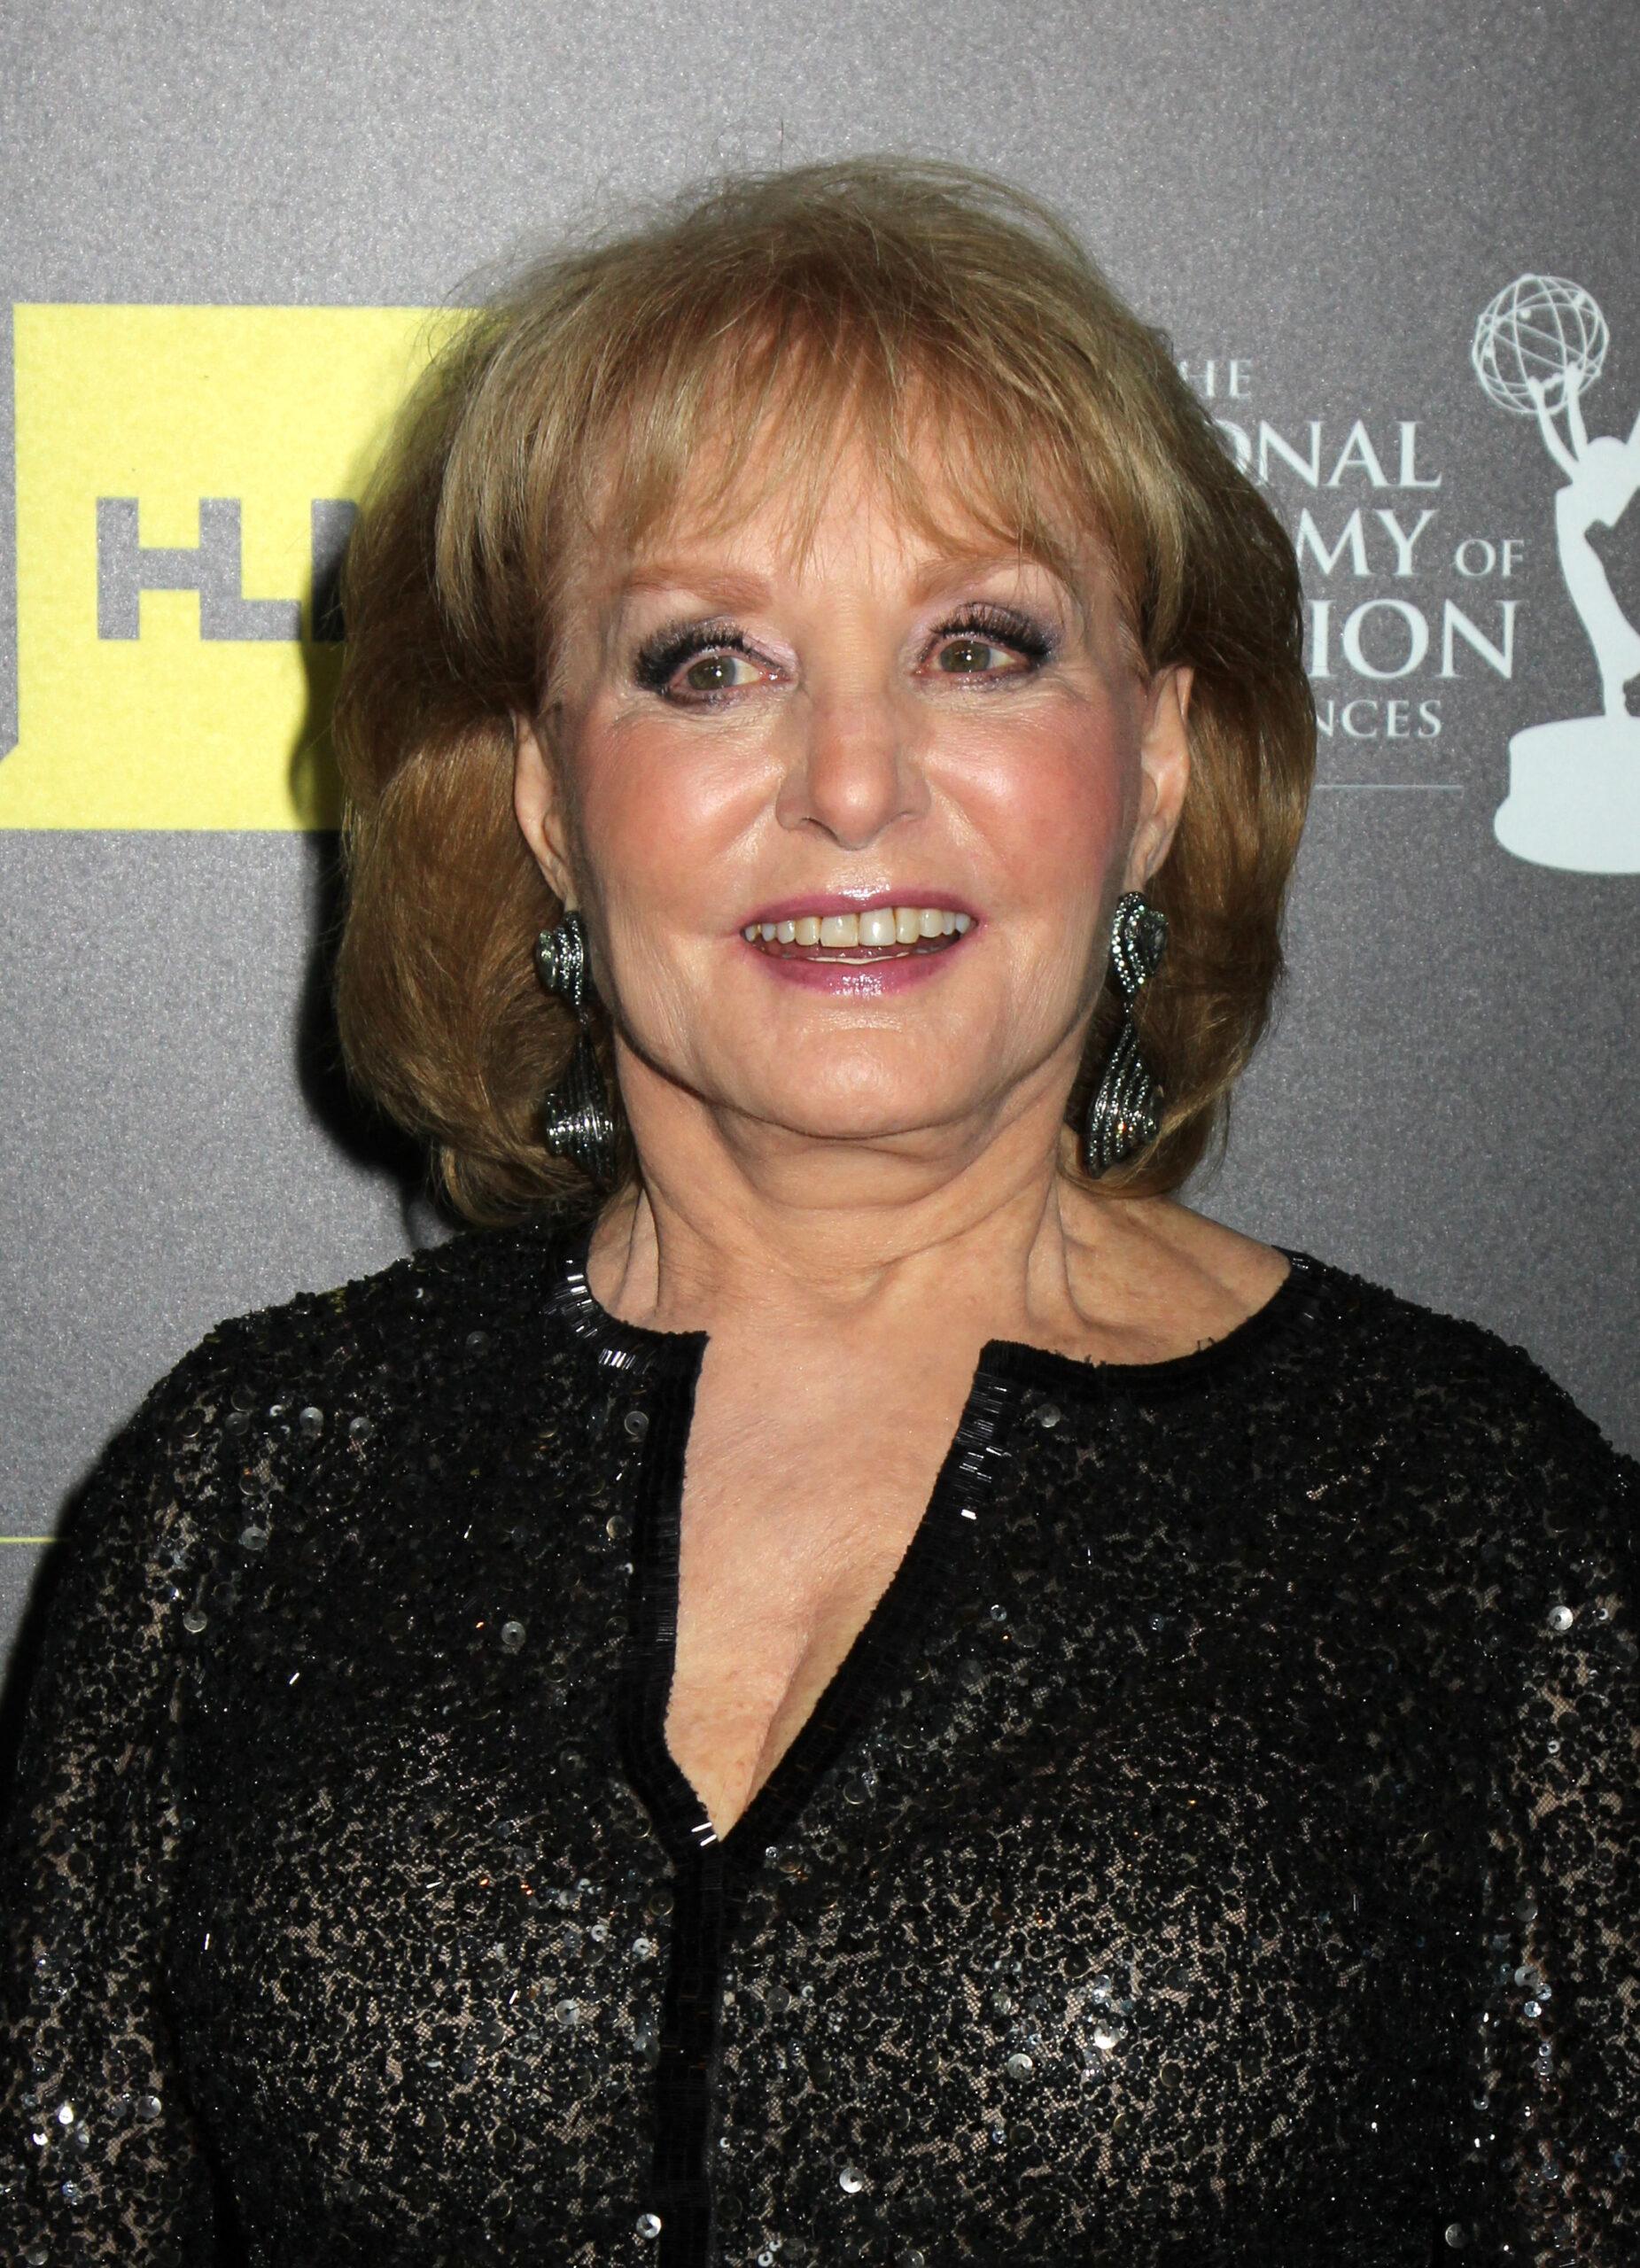 Barbara Walters, legendary news anchor and creator of “The View” and host on the “Today” show has died at age 93